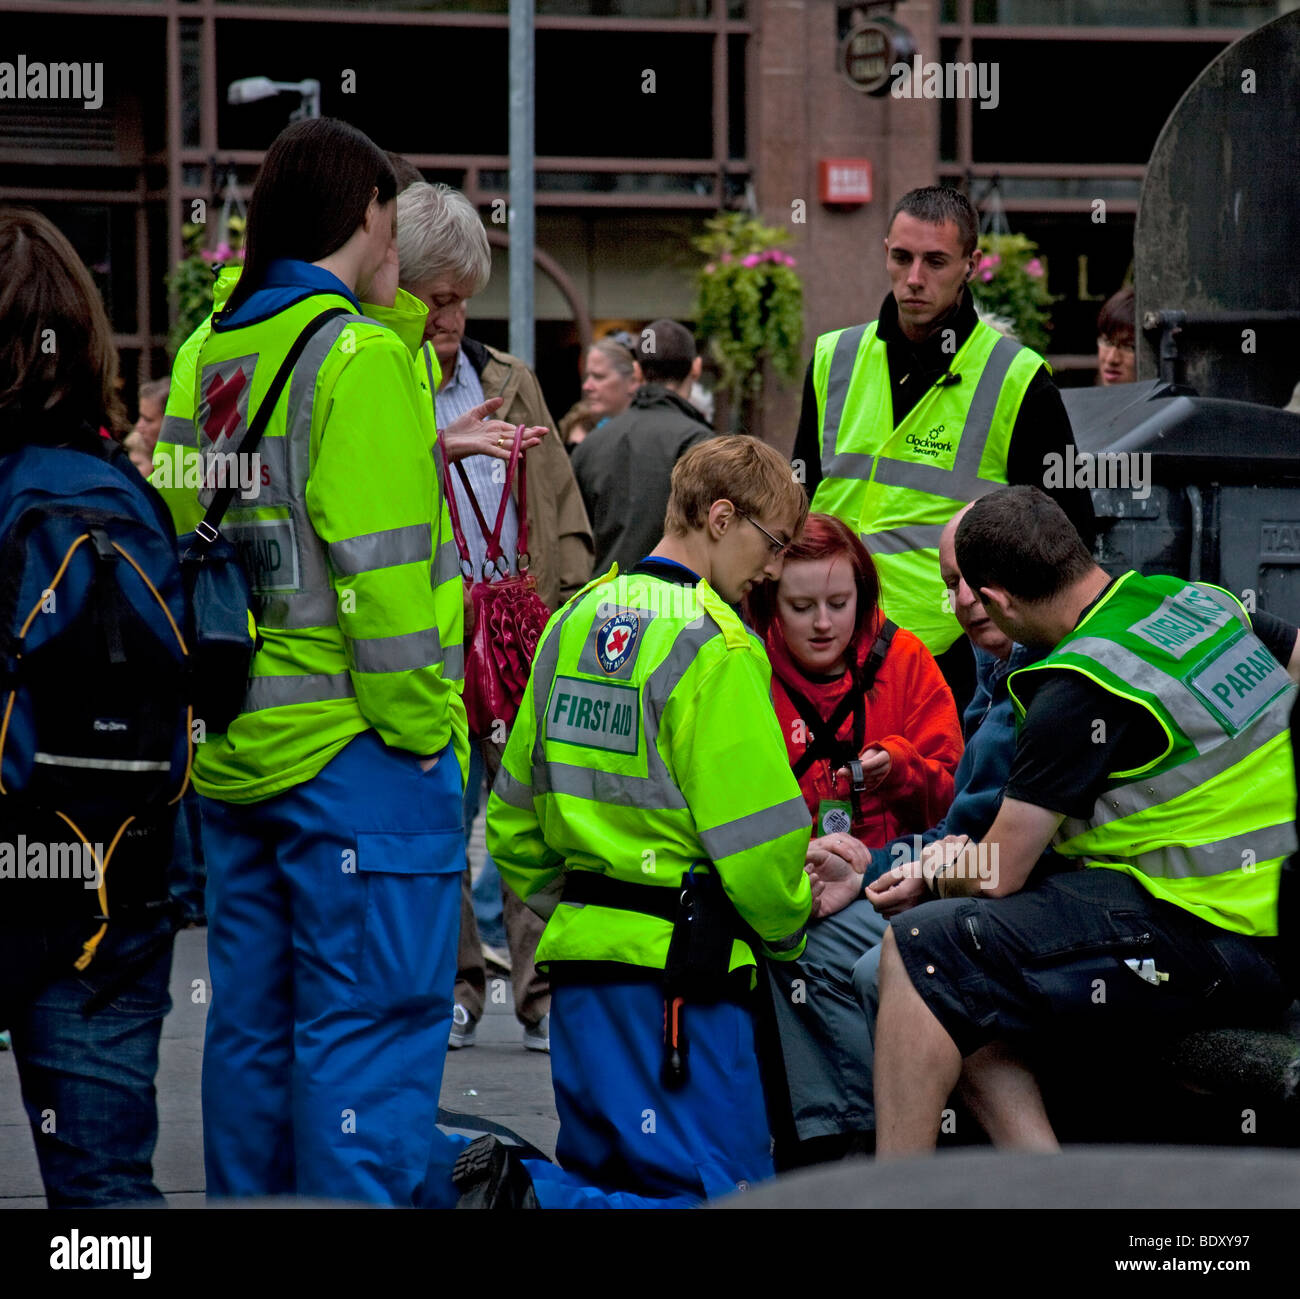 First Aid team and Paramedic attend a patient Edinburgh Scotland UK Europe Stock Photo